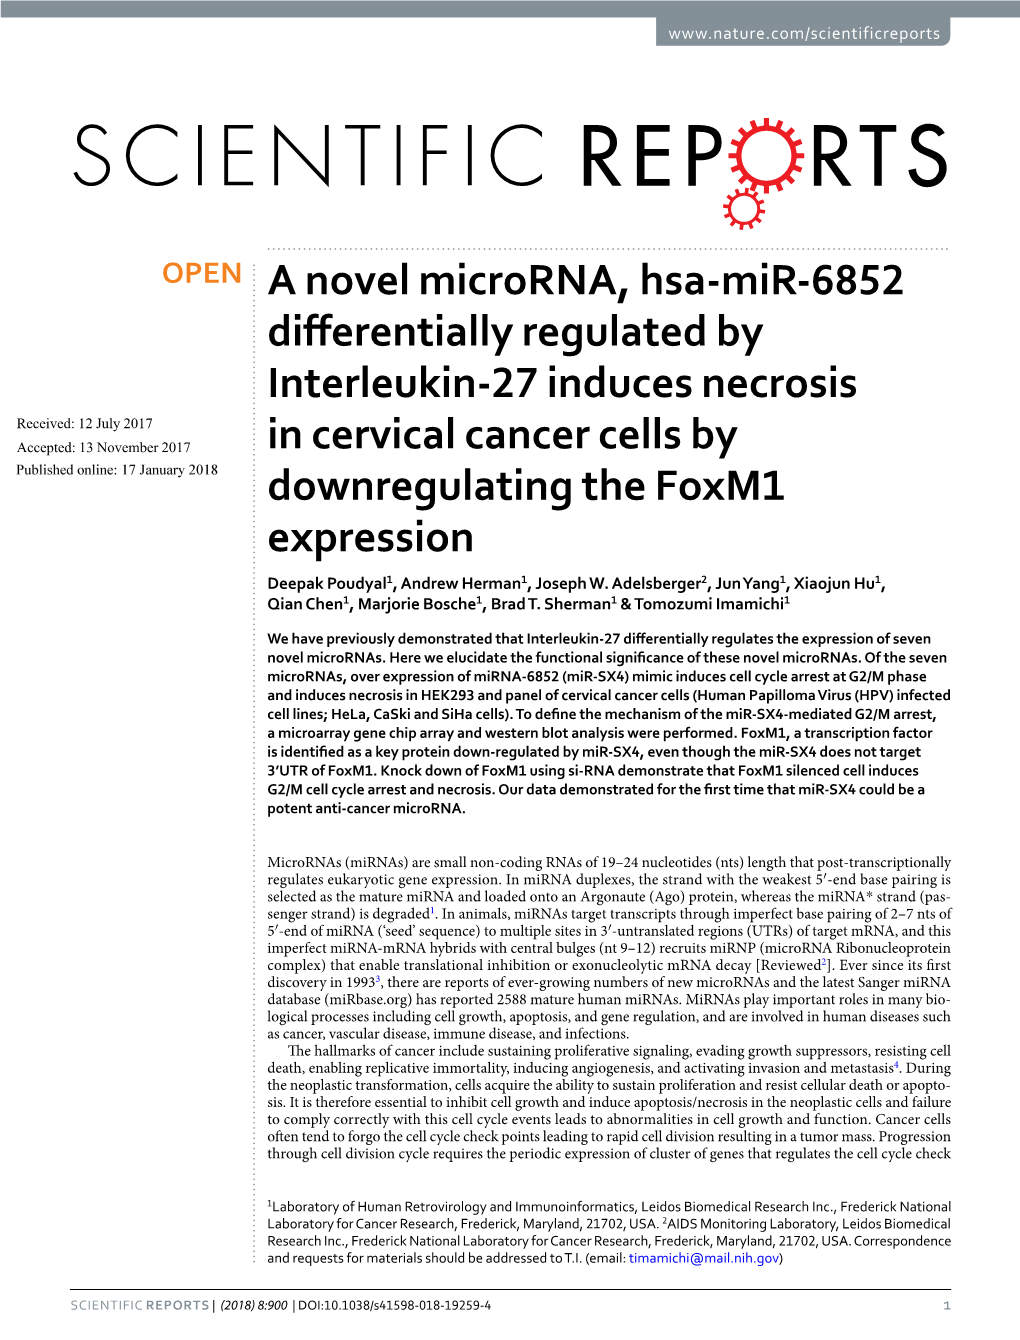 A Novel Microrna, Hsa-Mir-6852 Differentially Regulated by Interleukin-27 Induces Necrosis in Cervical Cancer Cells by Downregul